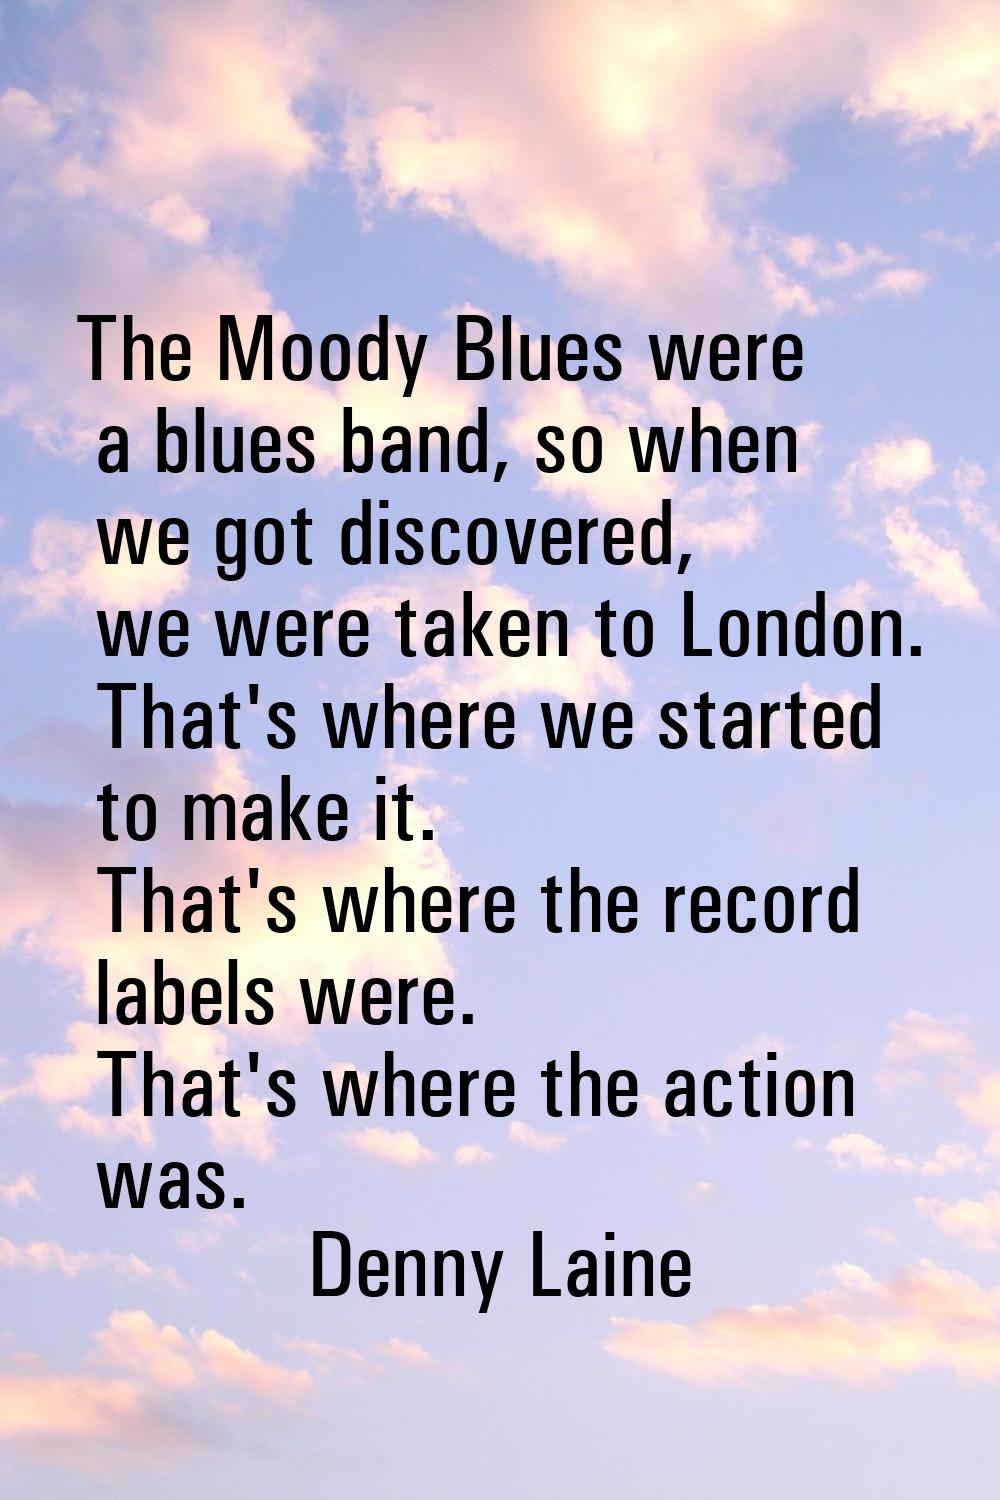 The Moody Blues were a blues band, so when we got discovered, we were taken to London. That's where